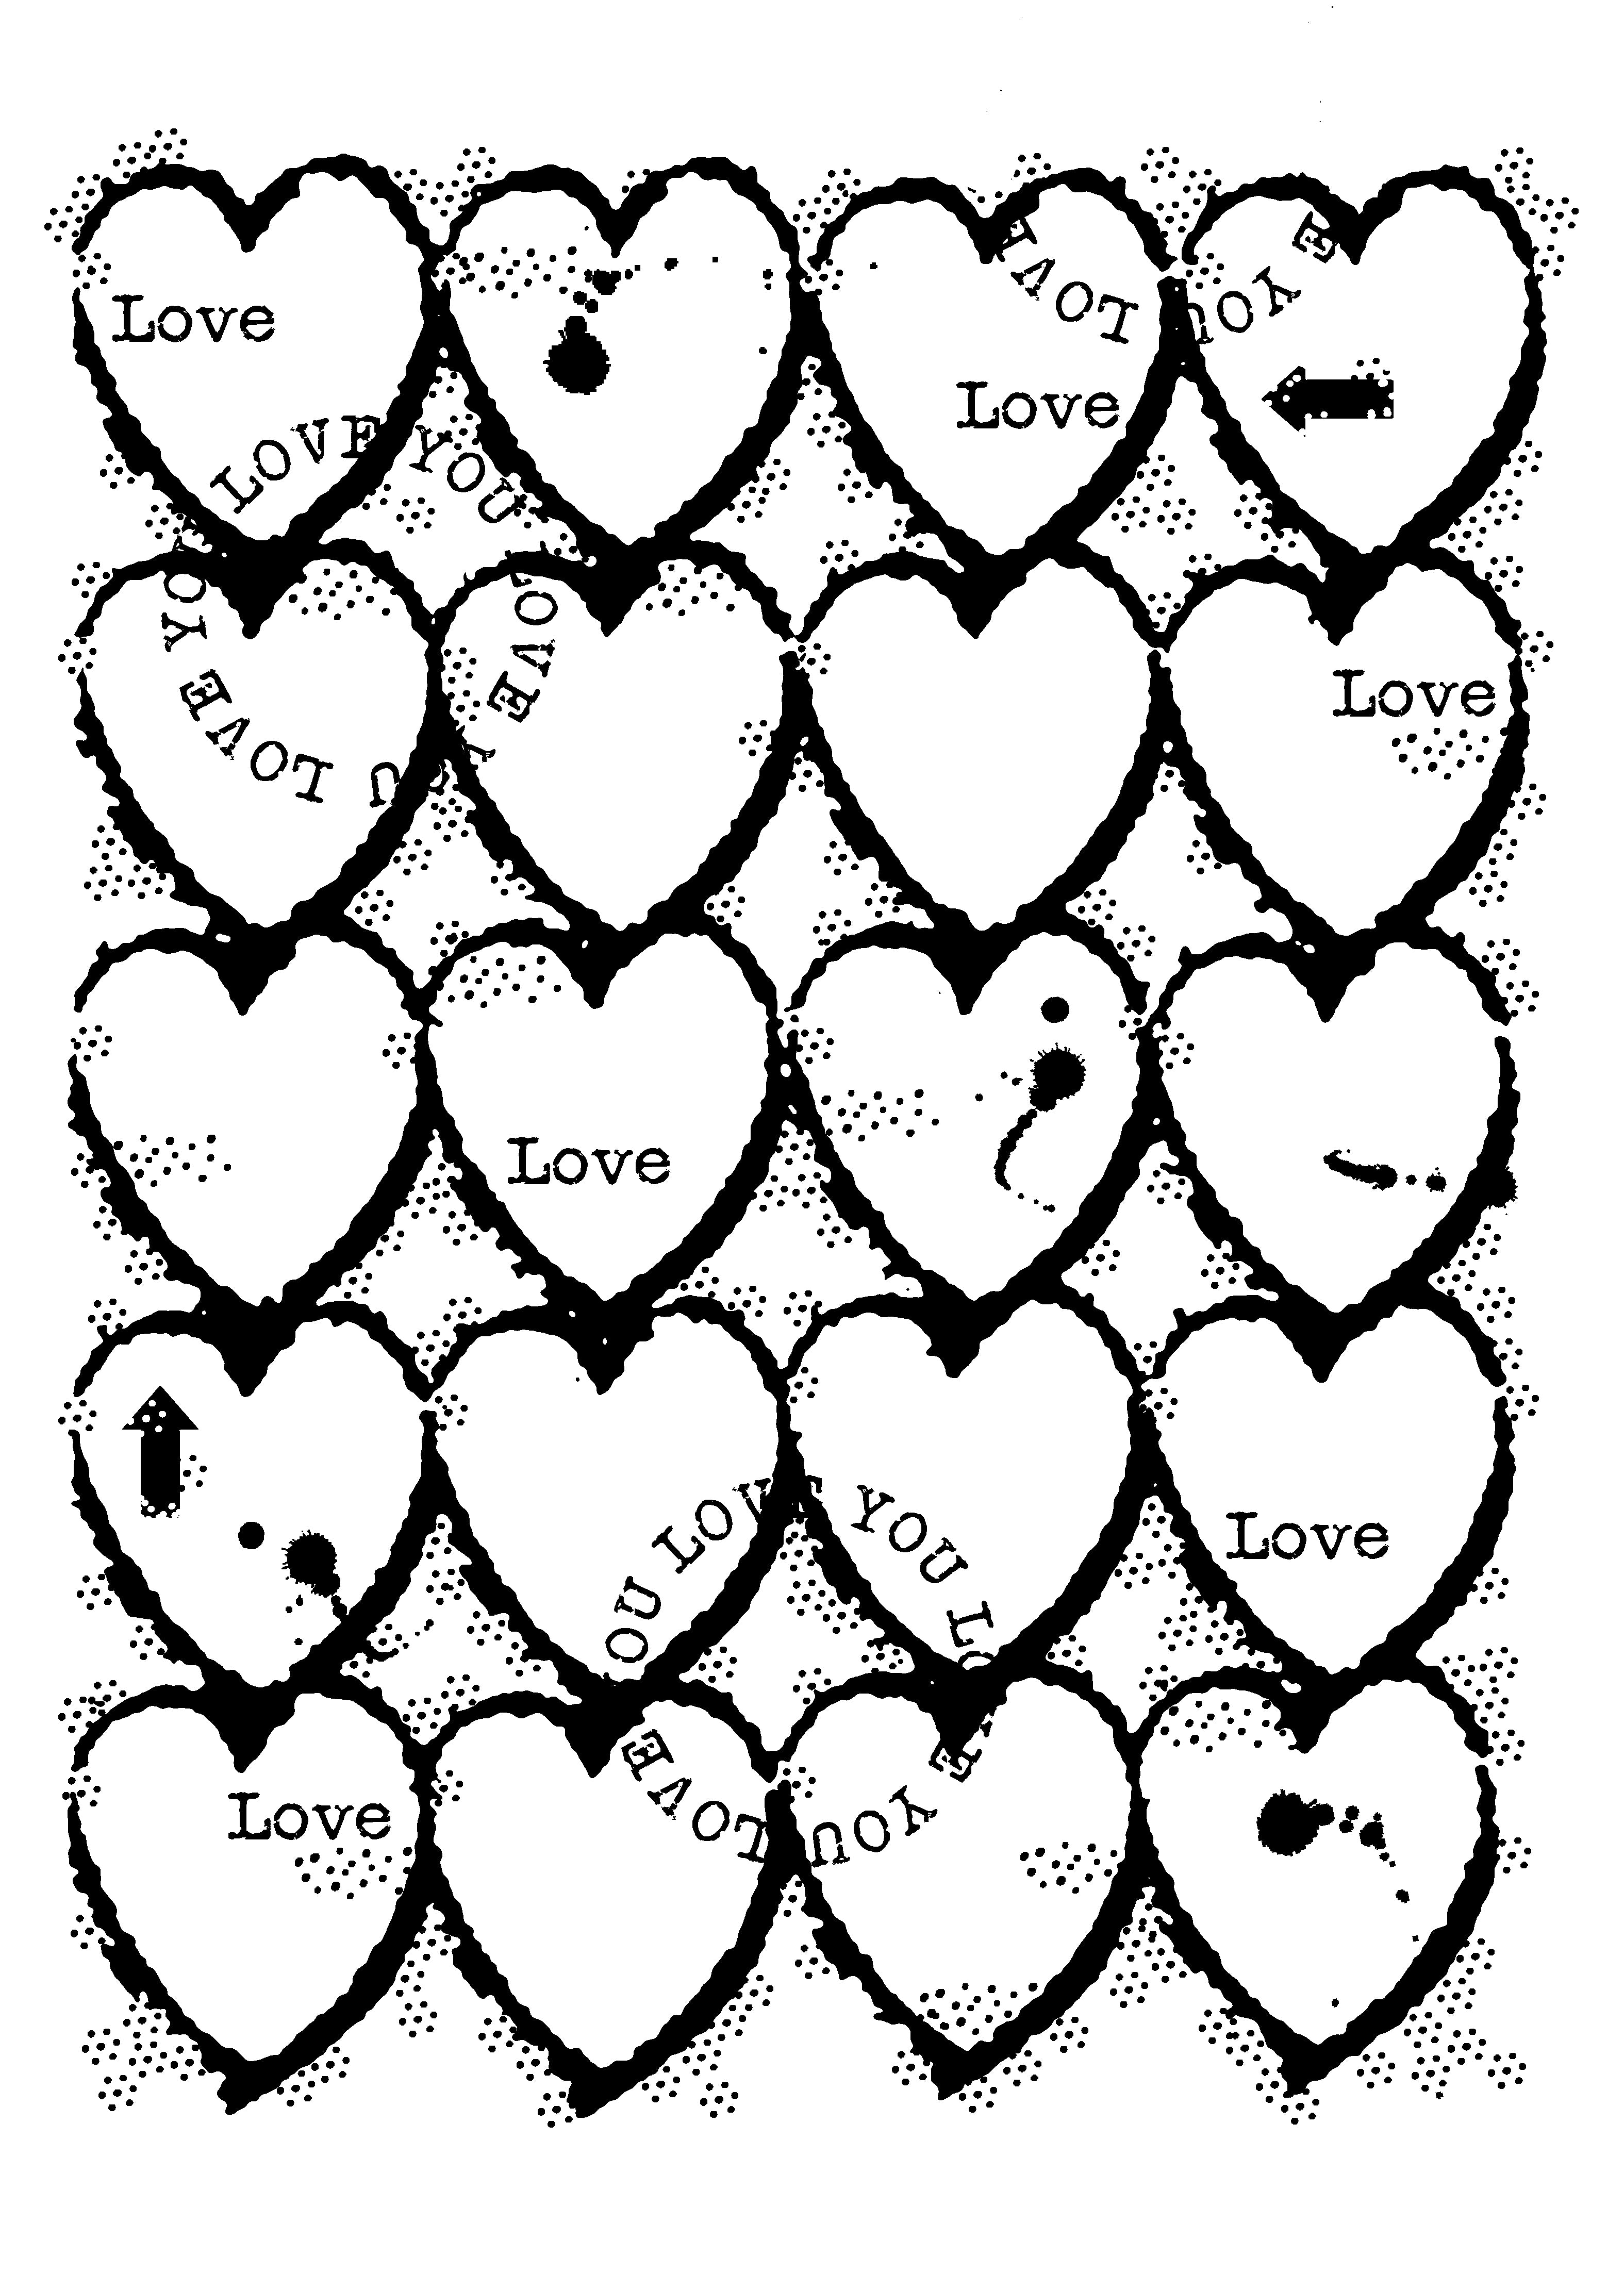 Woodware Clear Singles Heart Background 4 in x 6 in Stamp